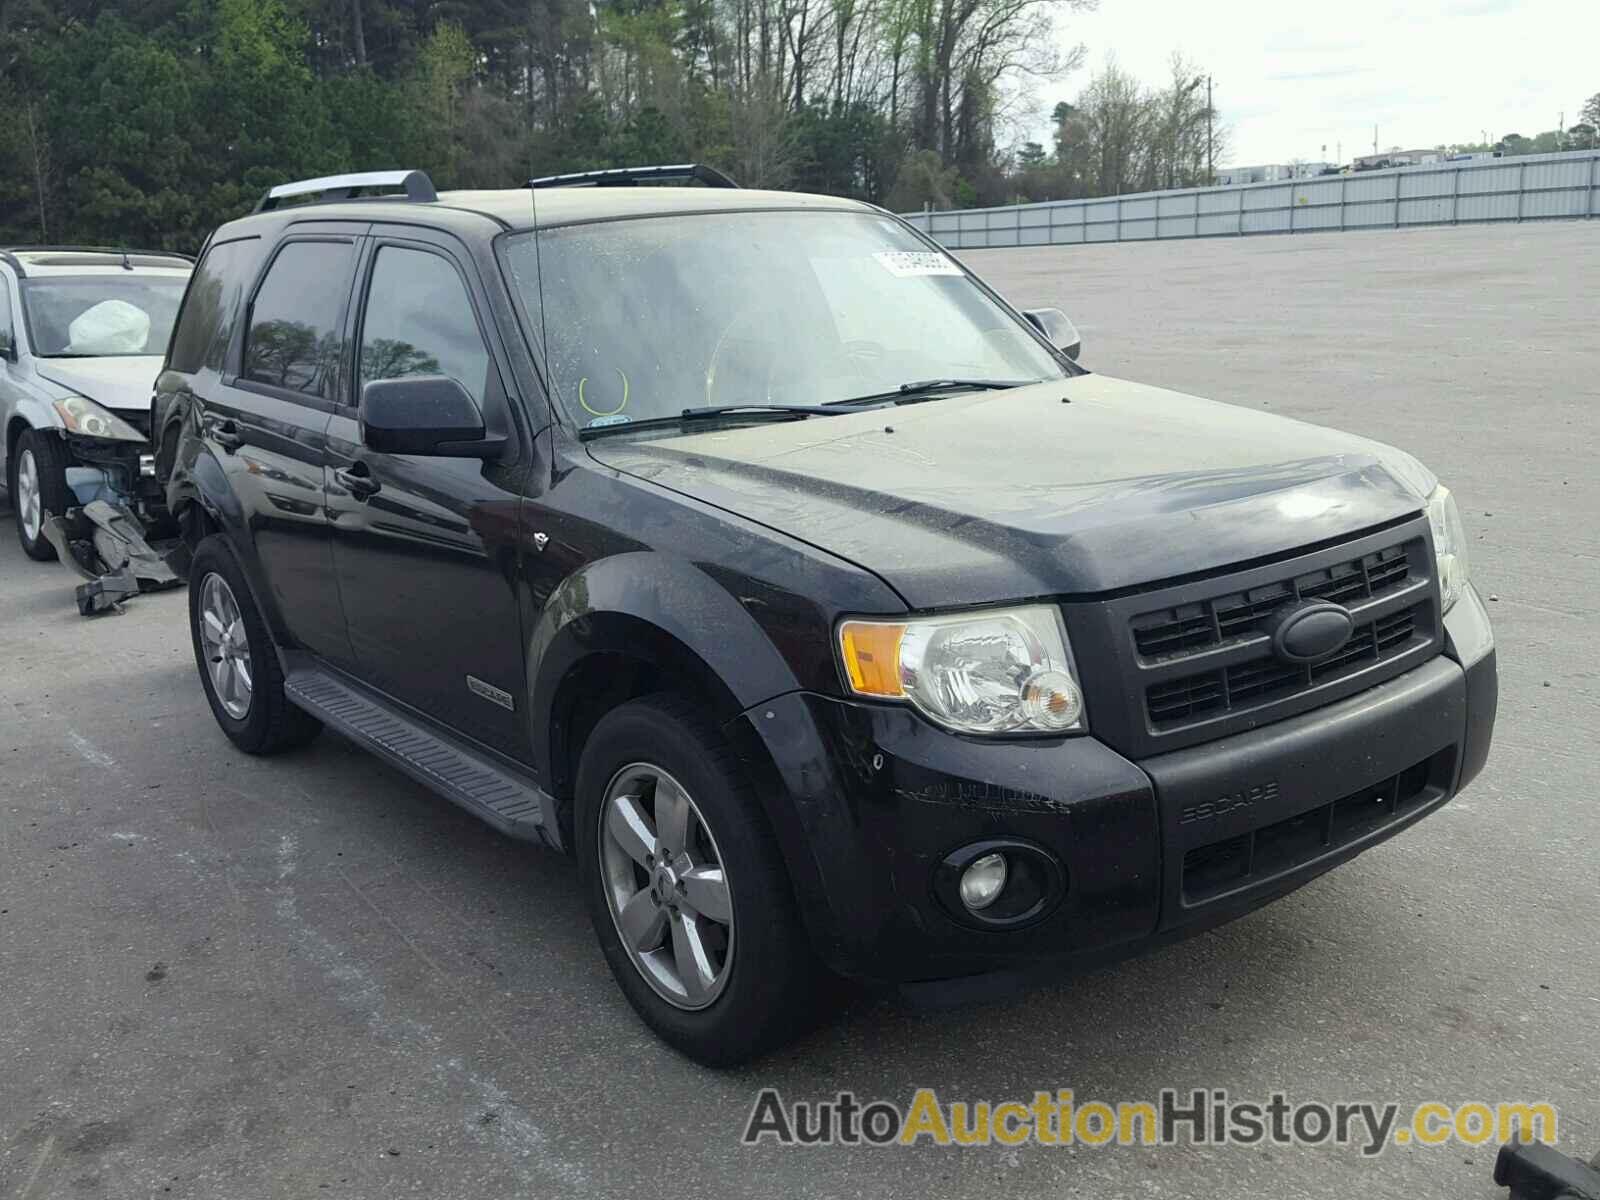 2008 FORD ESCAPE LIMITED, 1FMCU04138KD75980